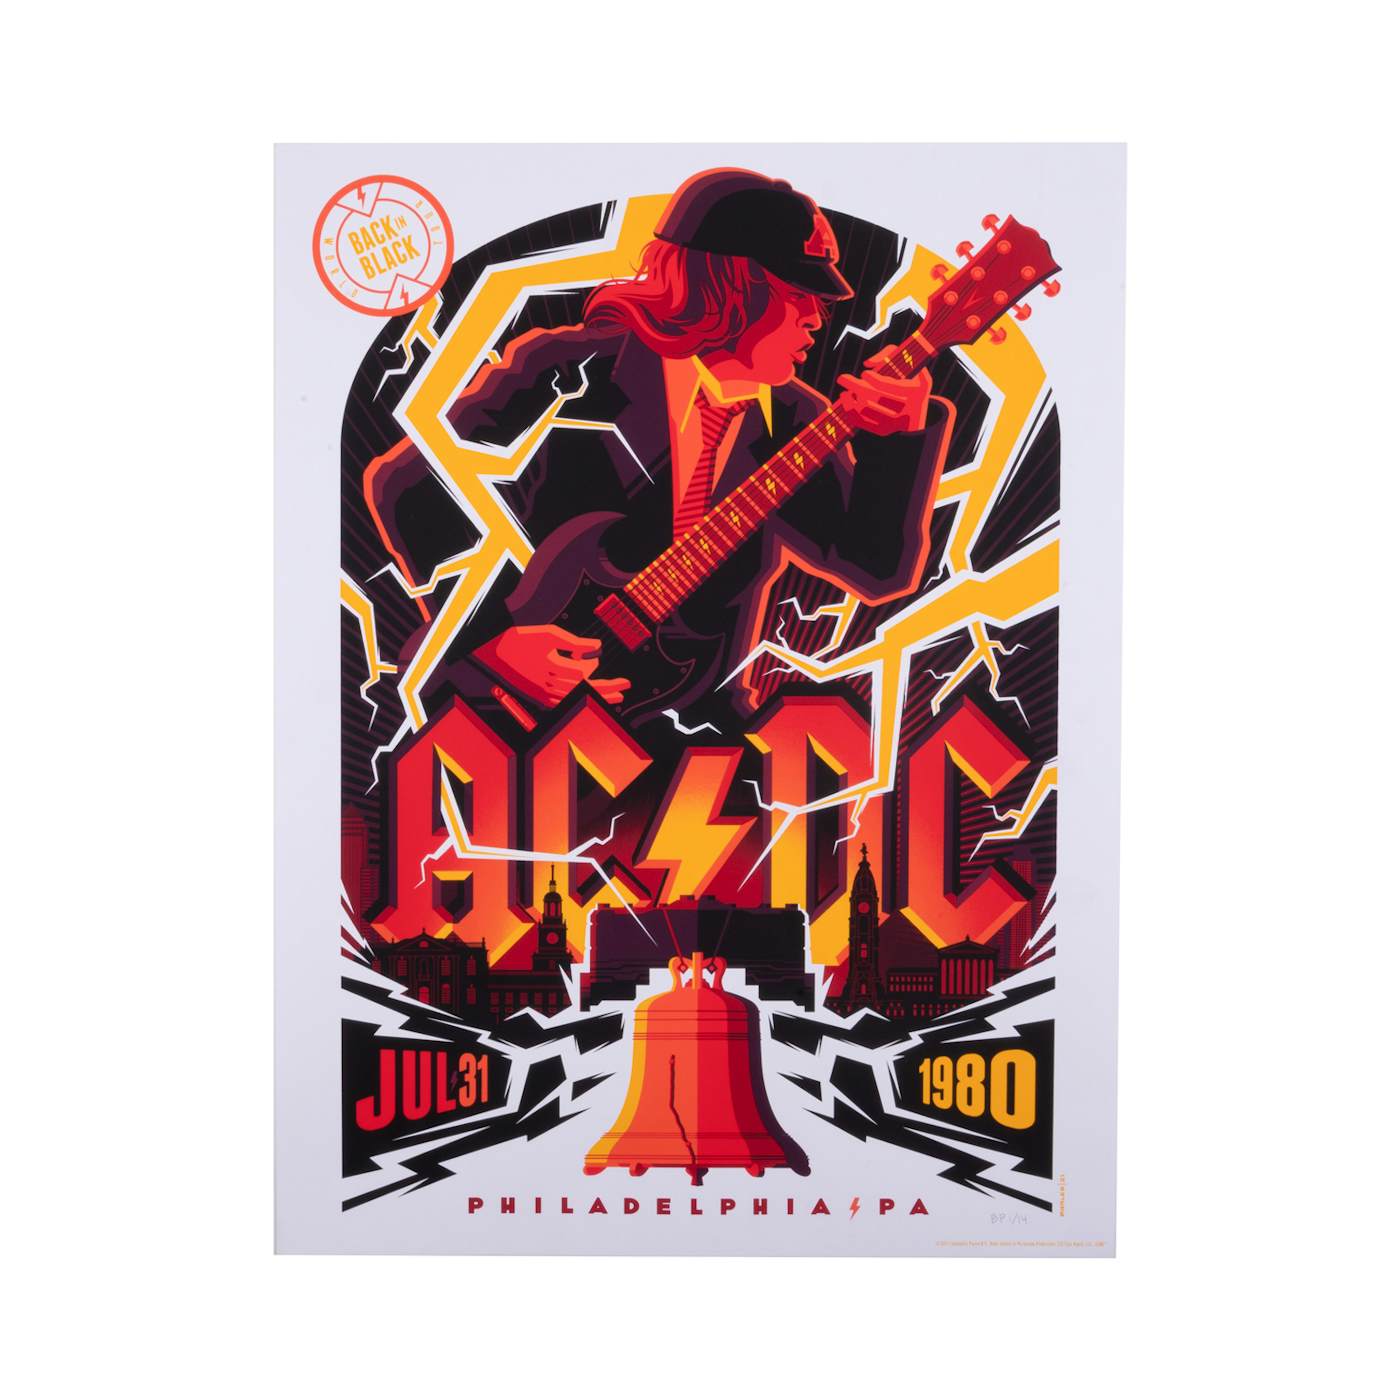 AC/DC JULY 31, 1980 PHILADELPHIA, PA POSTER GALLERY EDITION